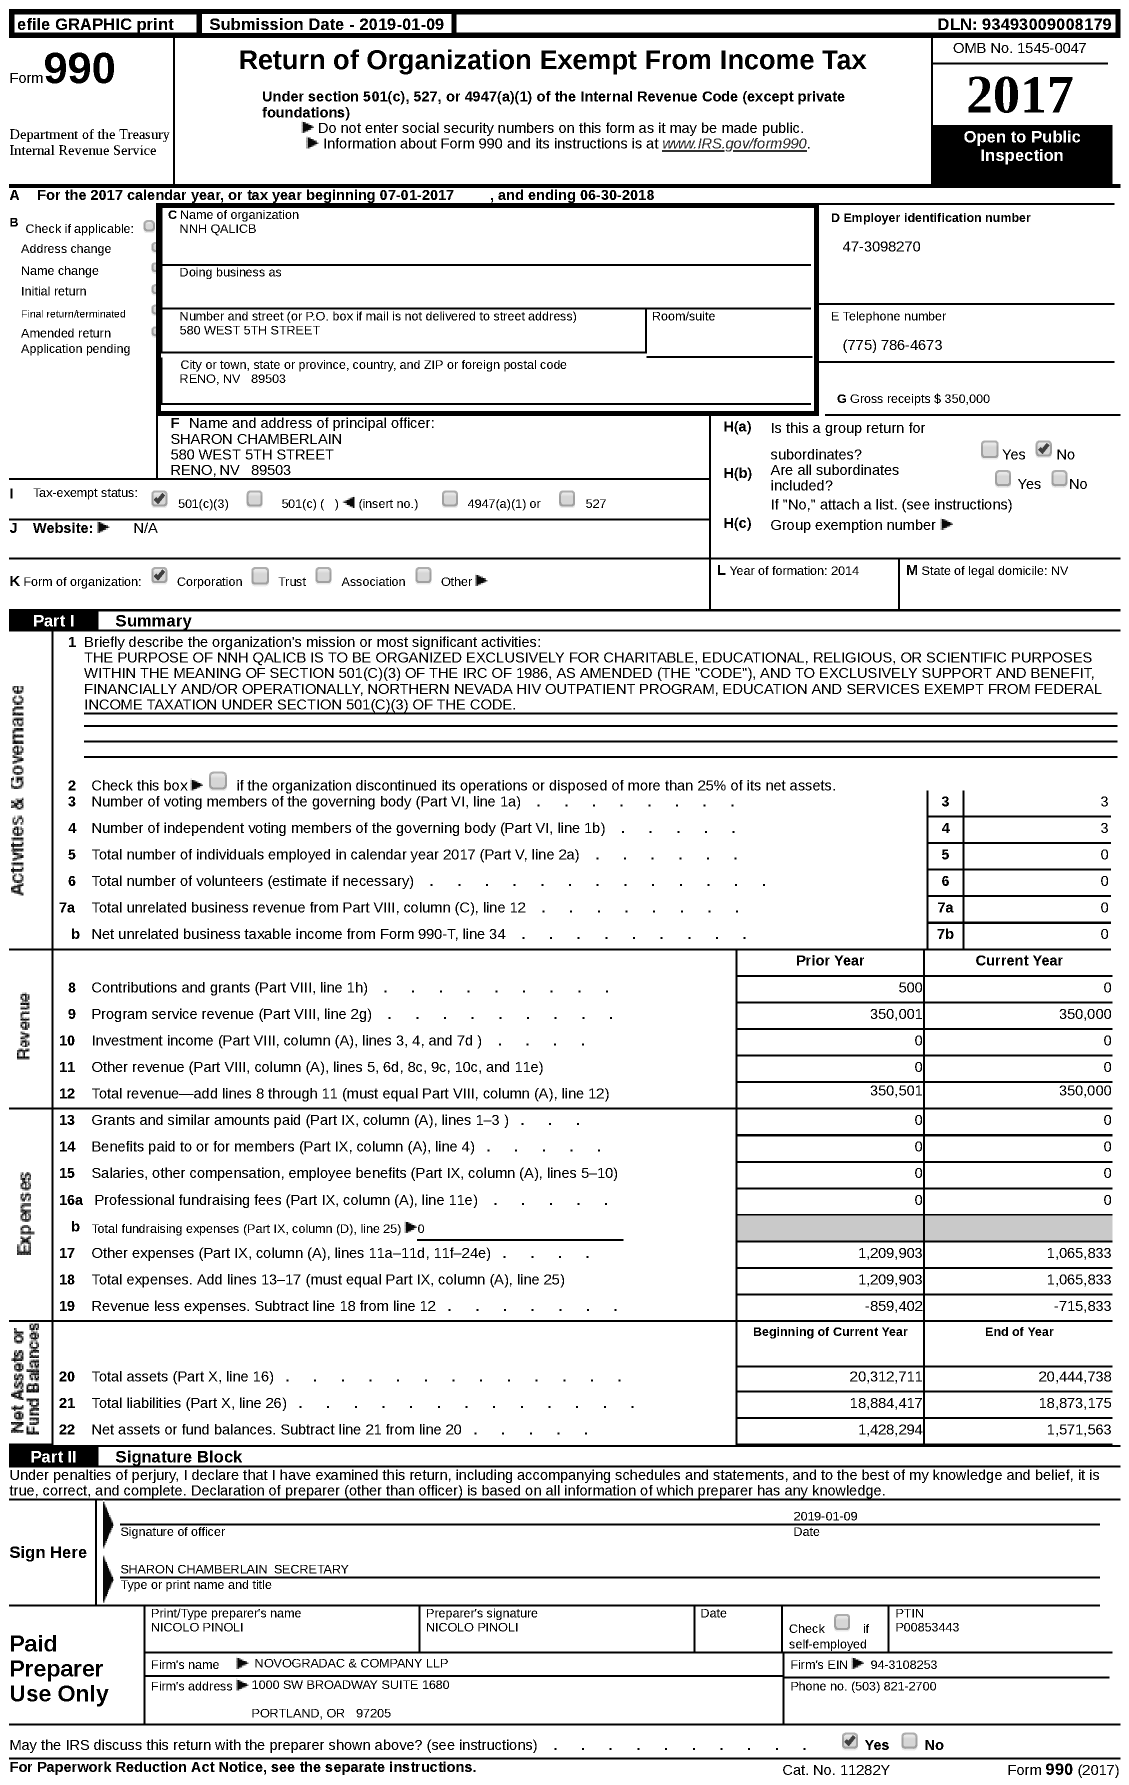 Image of first page of 2017 Form 990 for NNH Qalicb